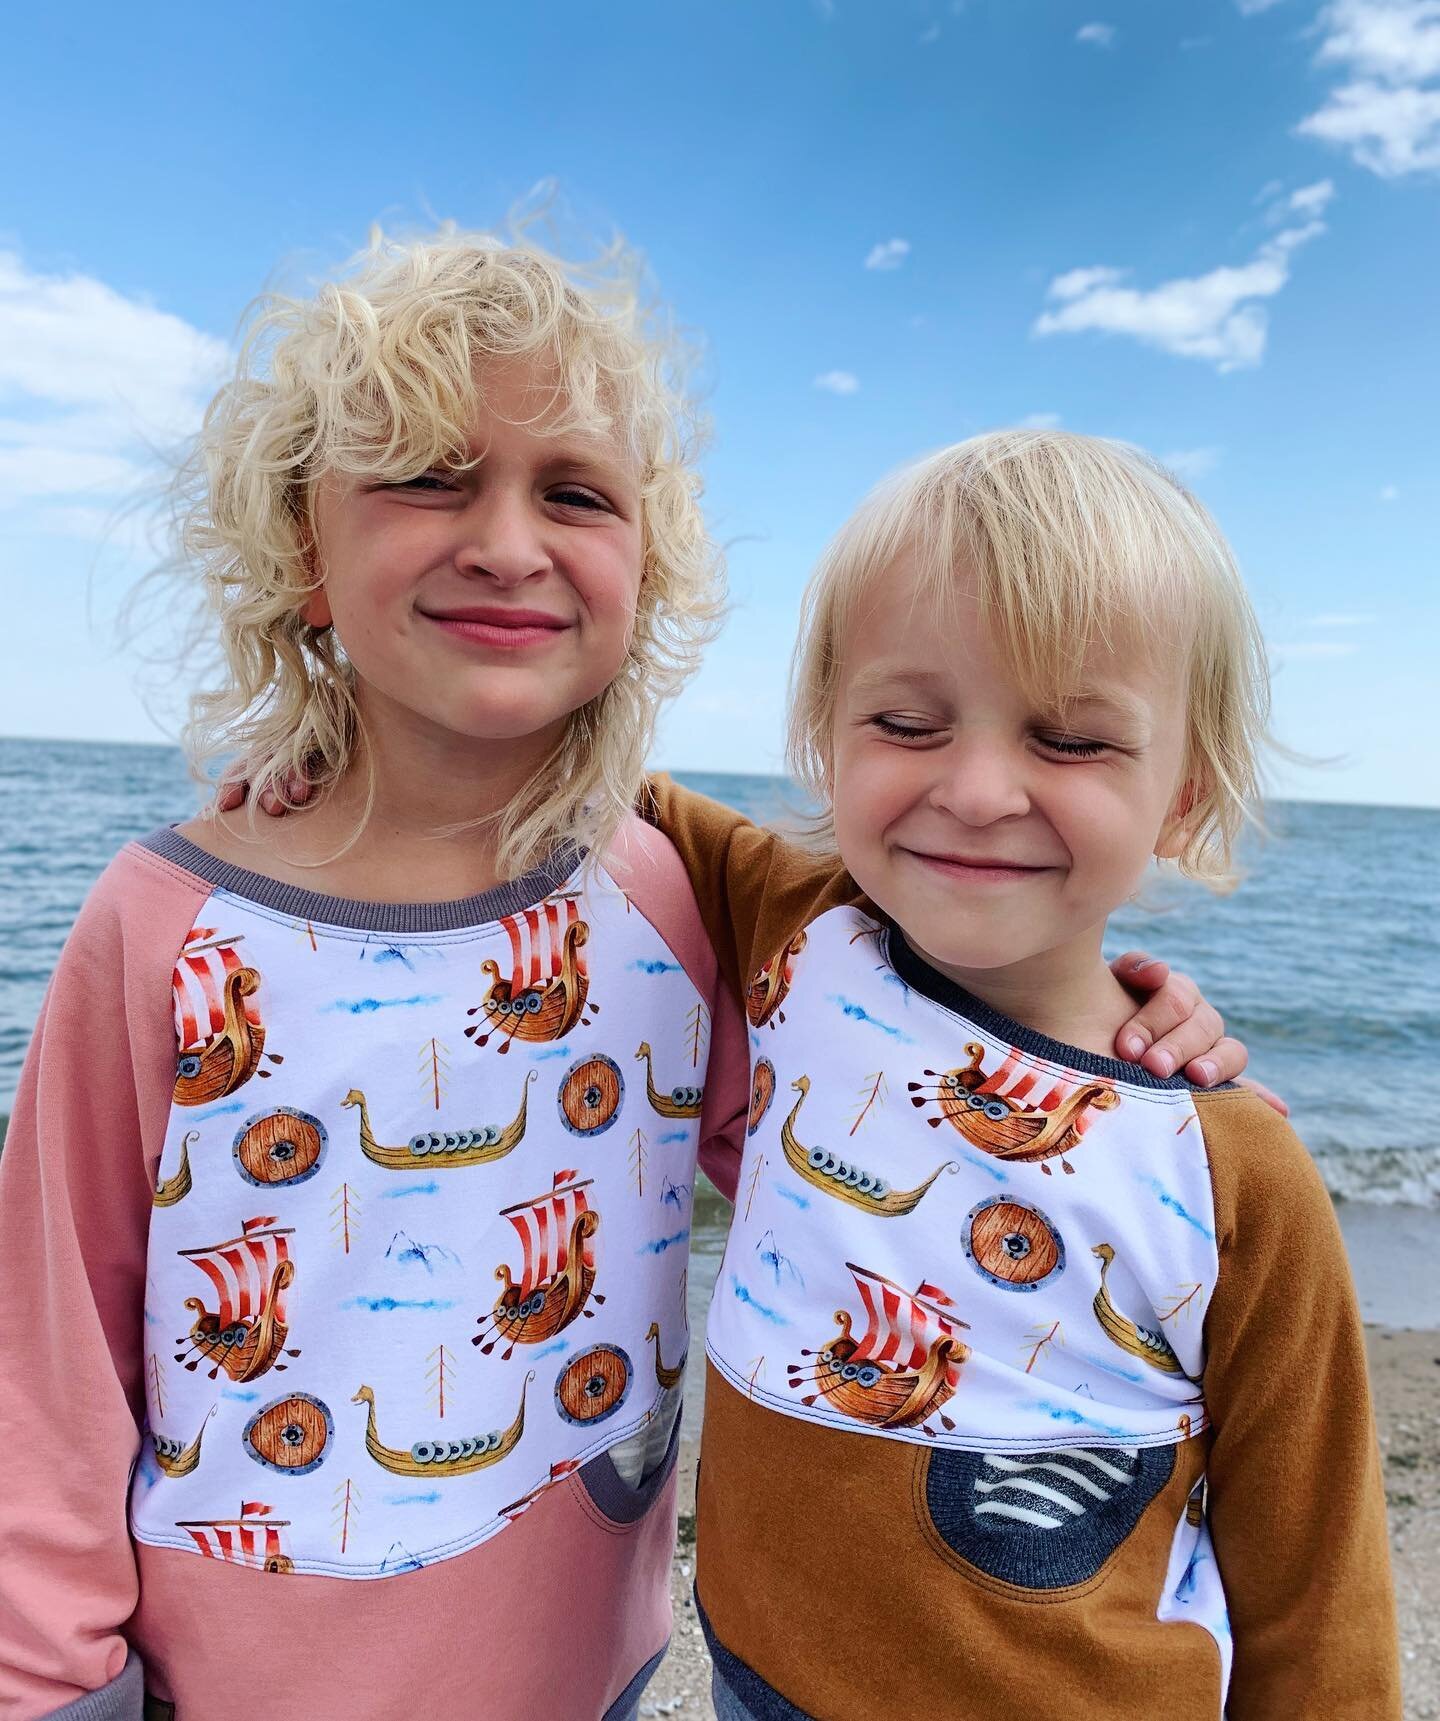 The last long weekend of summer ☀️ Come visit us at Harbour Mart, grab an ice cream or stock up on your weekend needs and enjoy the beautiful weather at the lake before fall settles in for good! 🍂 Also, how amazing are these sweaters from @wheatandw